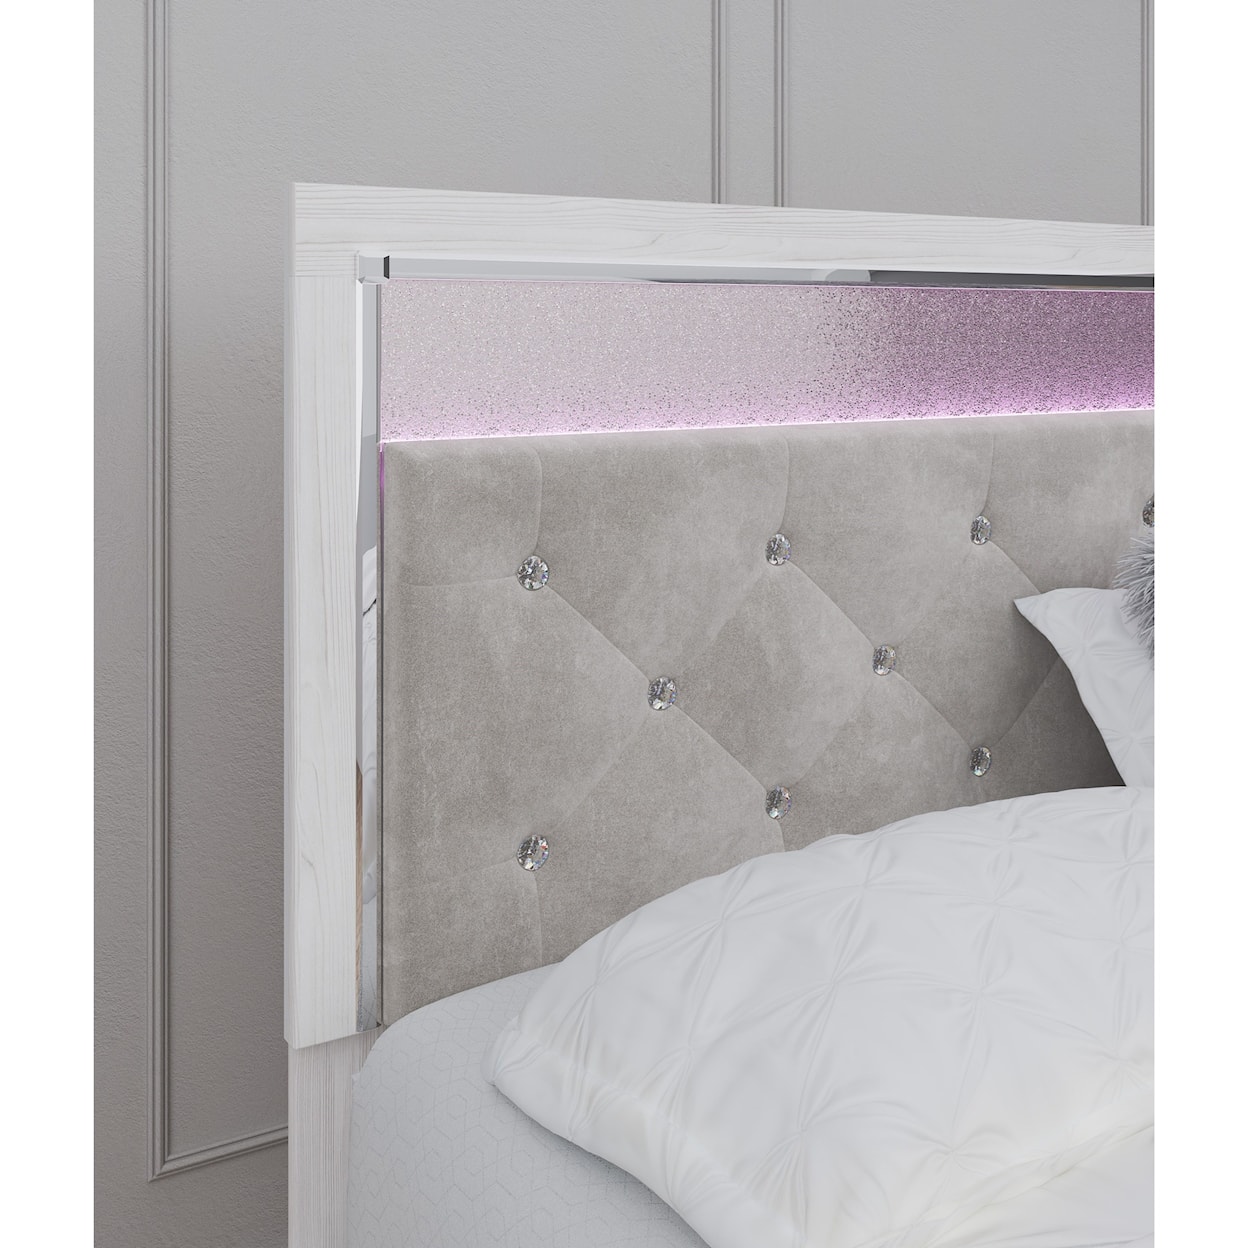 Signature Design by Ashley Altyra King Storage Bed with Upholstered Headboard